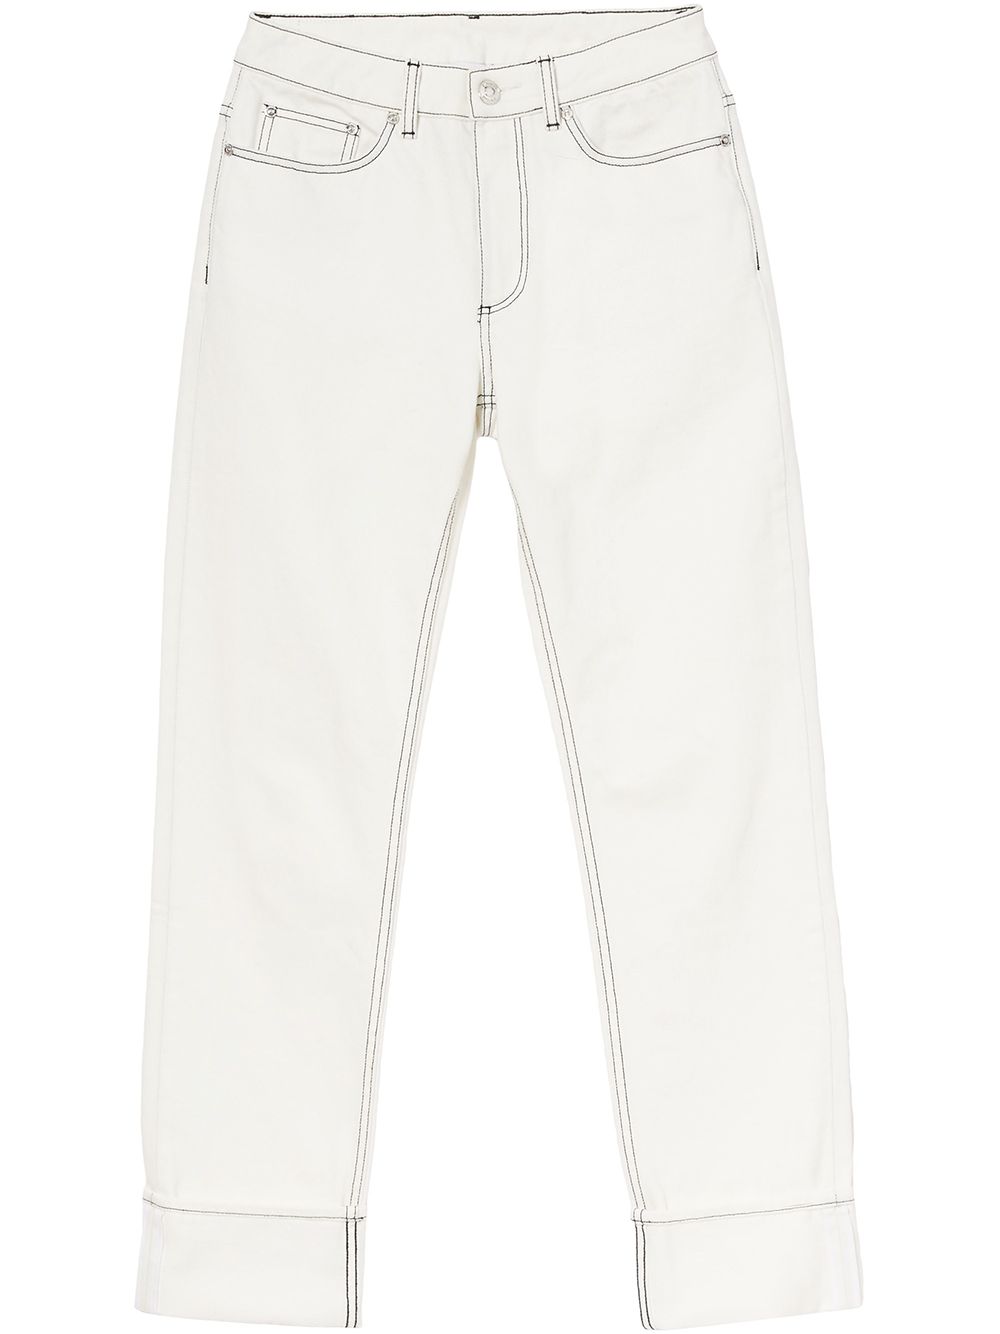 BURBERRY STRAIGHT-FIT TOPSTITCHED WASHED JEANS